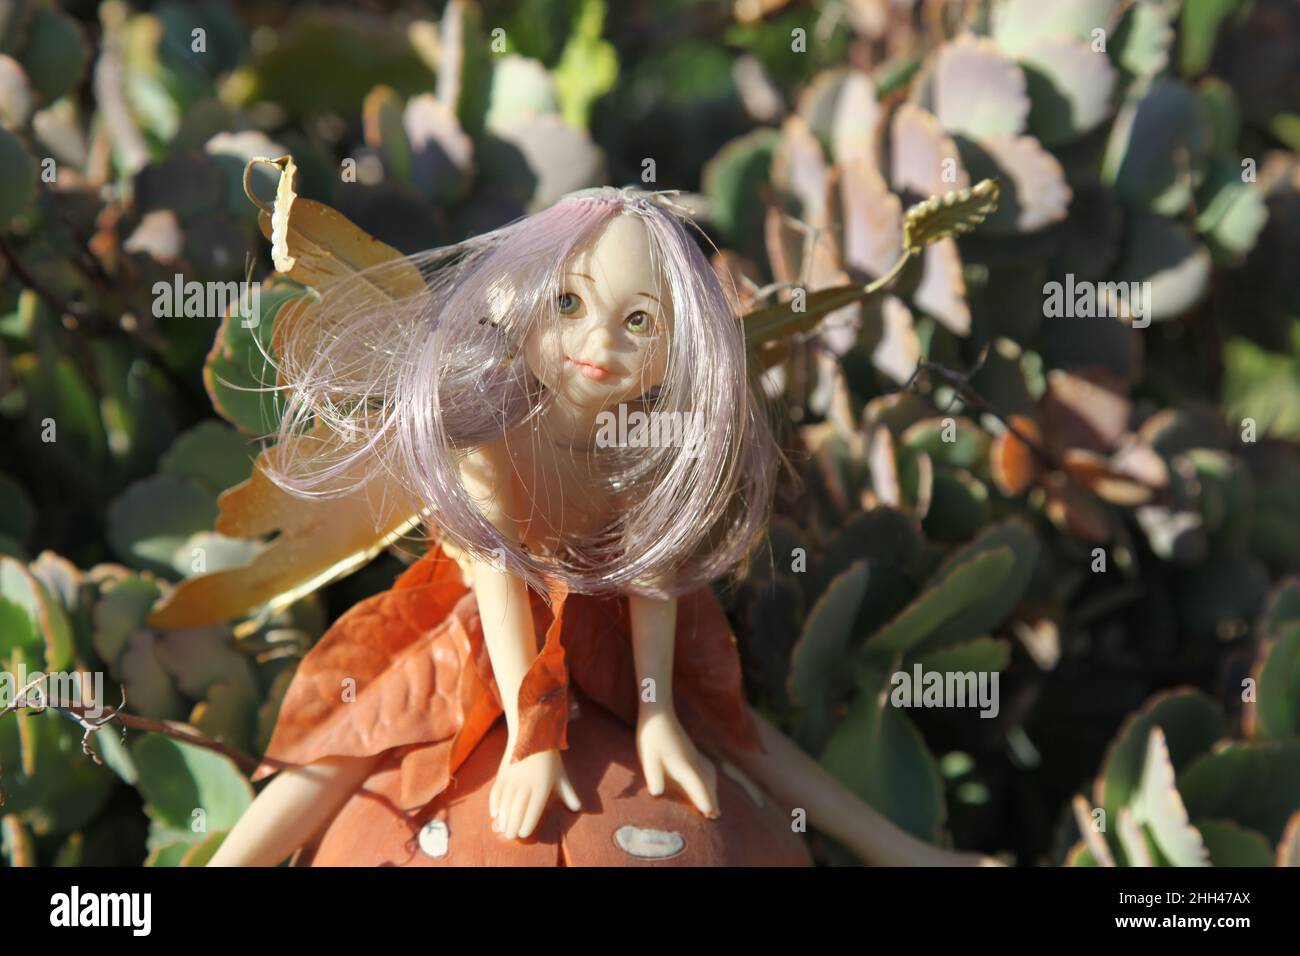 A cute fairy with long hair and wings. A fairy figurine sitting on a mushroom in the garden Stock Photo